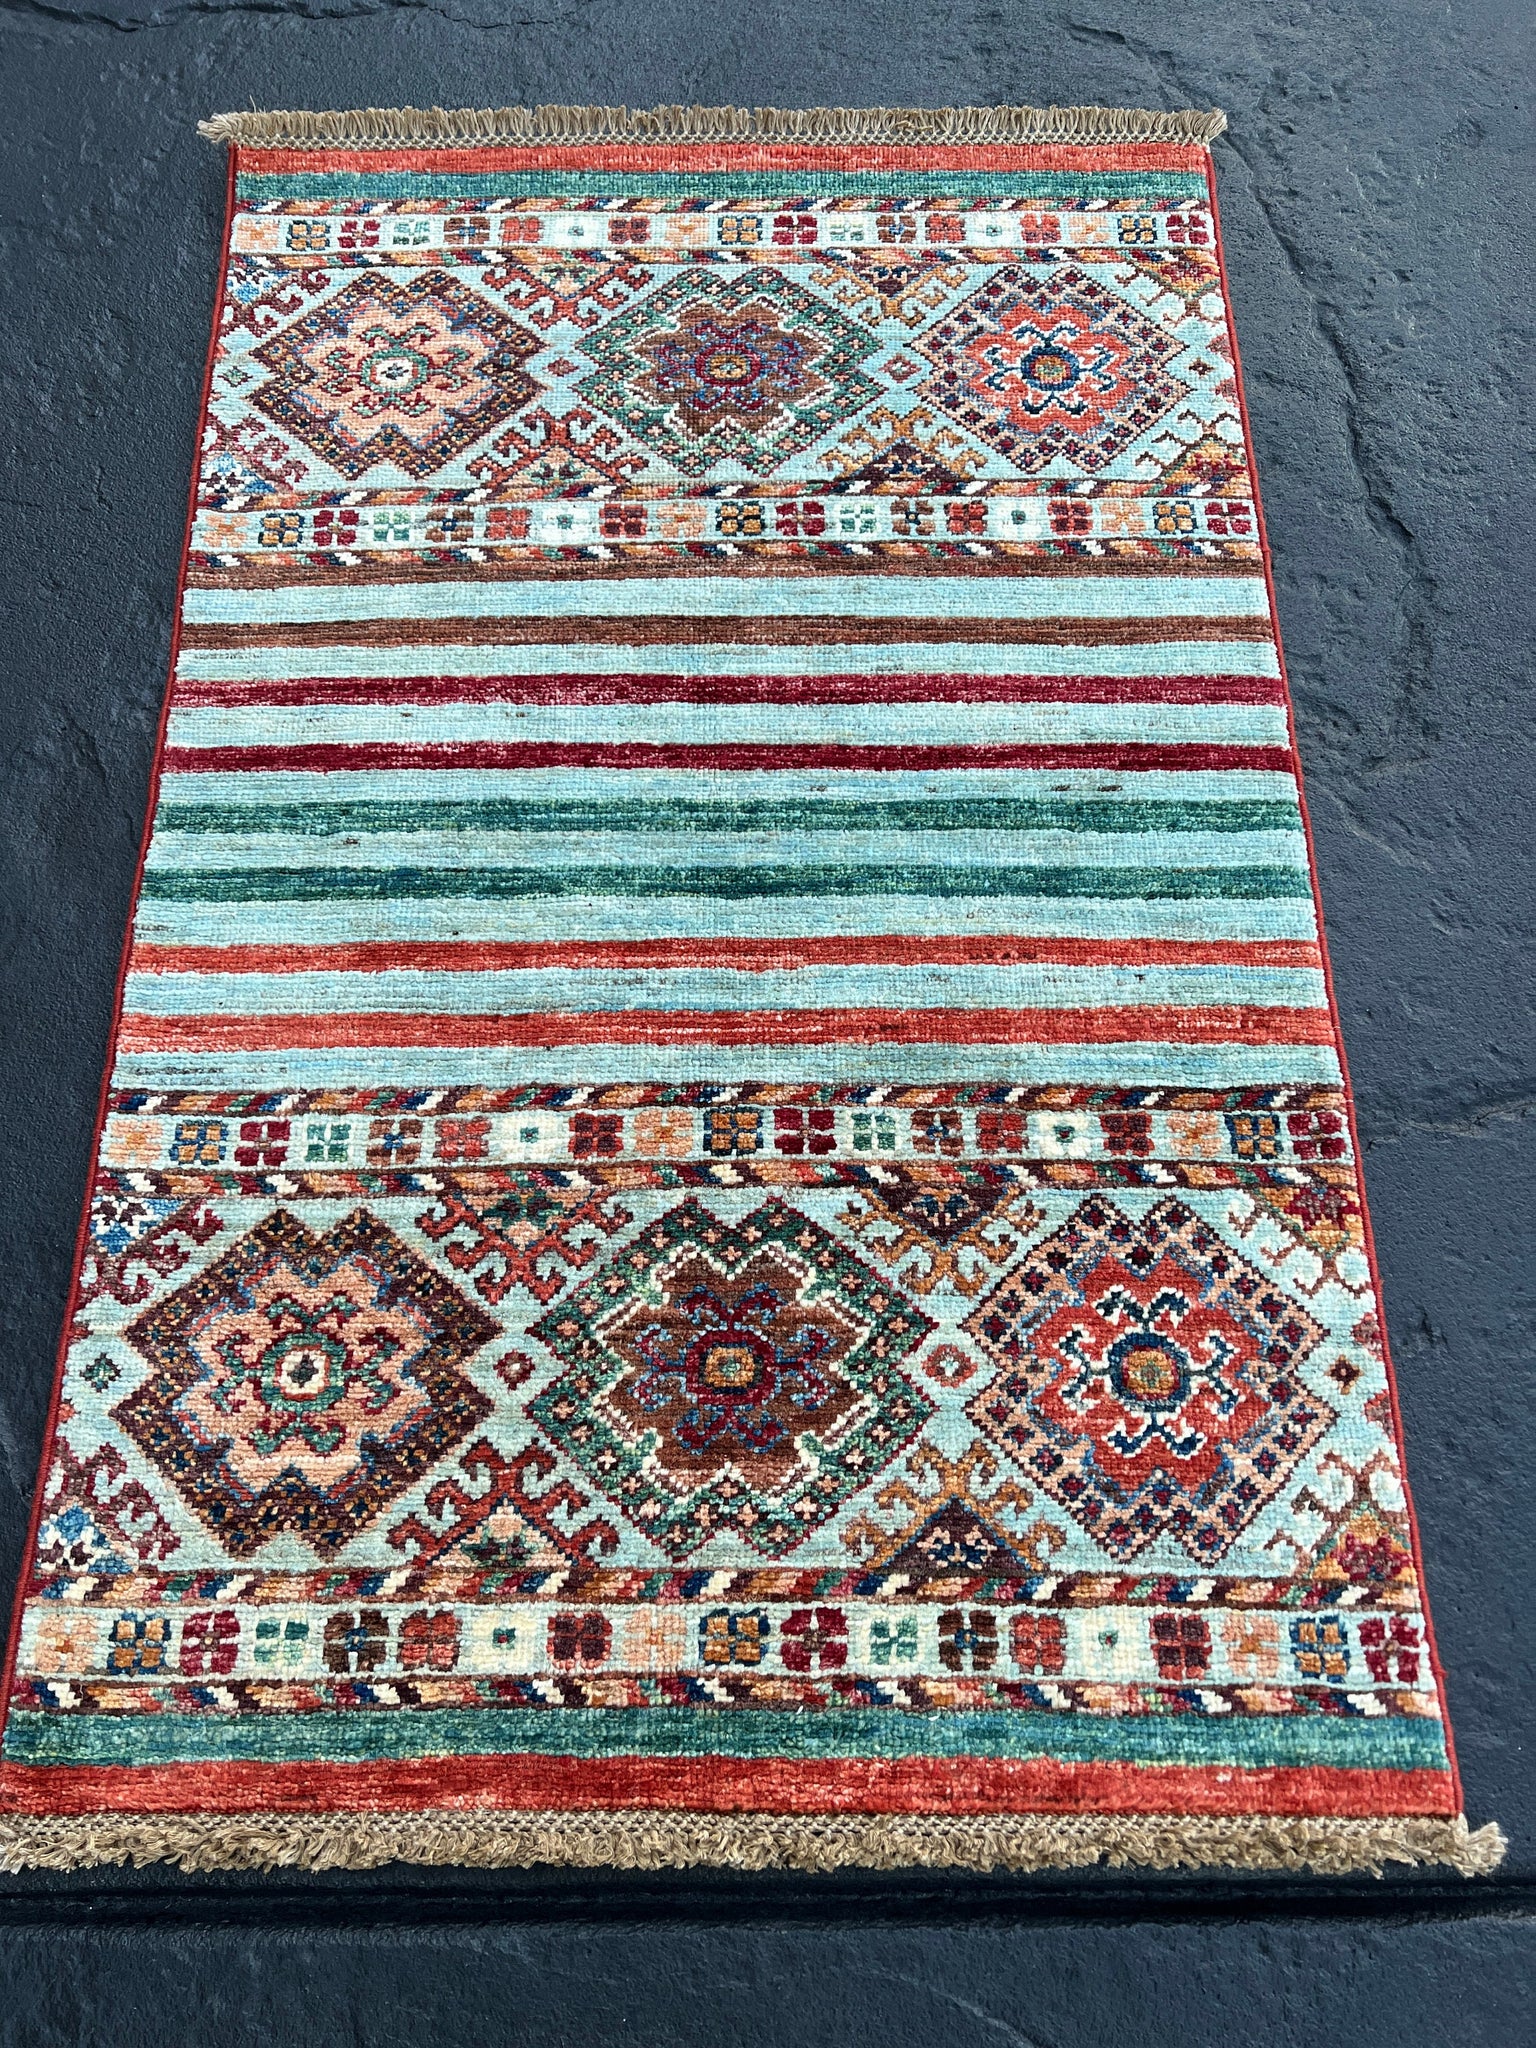 2x3 - 2x4 Handmade Afghan Rug | Turquoise Chocolate Brown Crimson Red Salmon Pink Caramel Blue Teal Forest Green | Hand Knotted Fair Trade